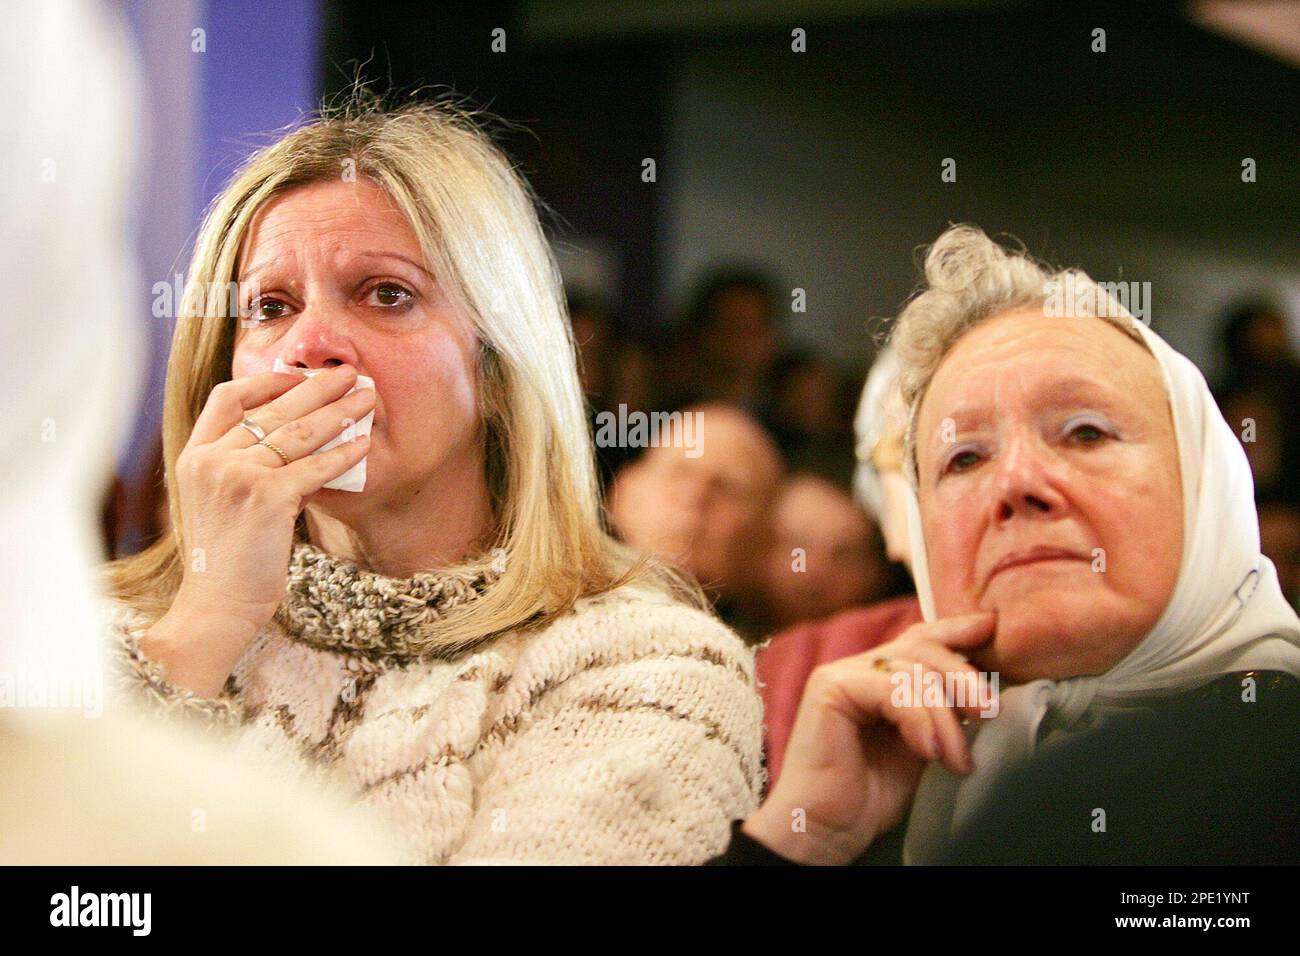 An unidentified woman cries beside Nora Cortinas, right, of the human rights group Mothers of Plaza de Mayo as they attend a news conference offered by an anthropologist in Buenos Aires, Friday, July 8, 2005, where it was announced that the remains of Esther Ballestrino de Careaga, Maria Ponce de Bianco and Azucena Villaflor, the three missing women who founded Mothers of Plaza de Mayo human rights group, were found and identified in a cemetery in the south of Buenos Aires. The three women were abducted in December 1977 while trying to find the fate of their missing children. (AP Photo/Natacha Foto Stock